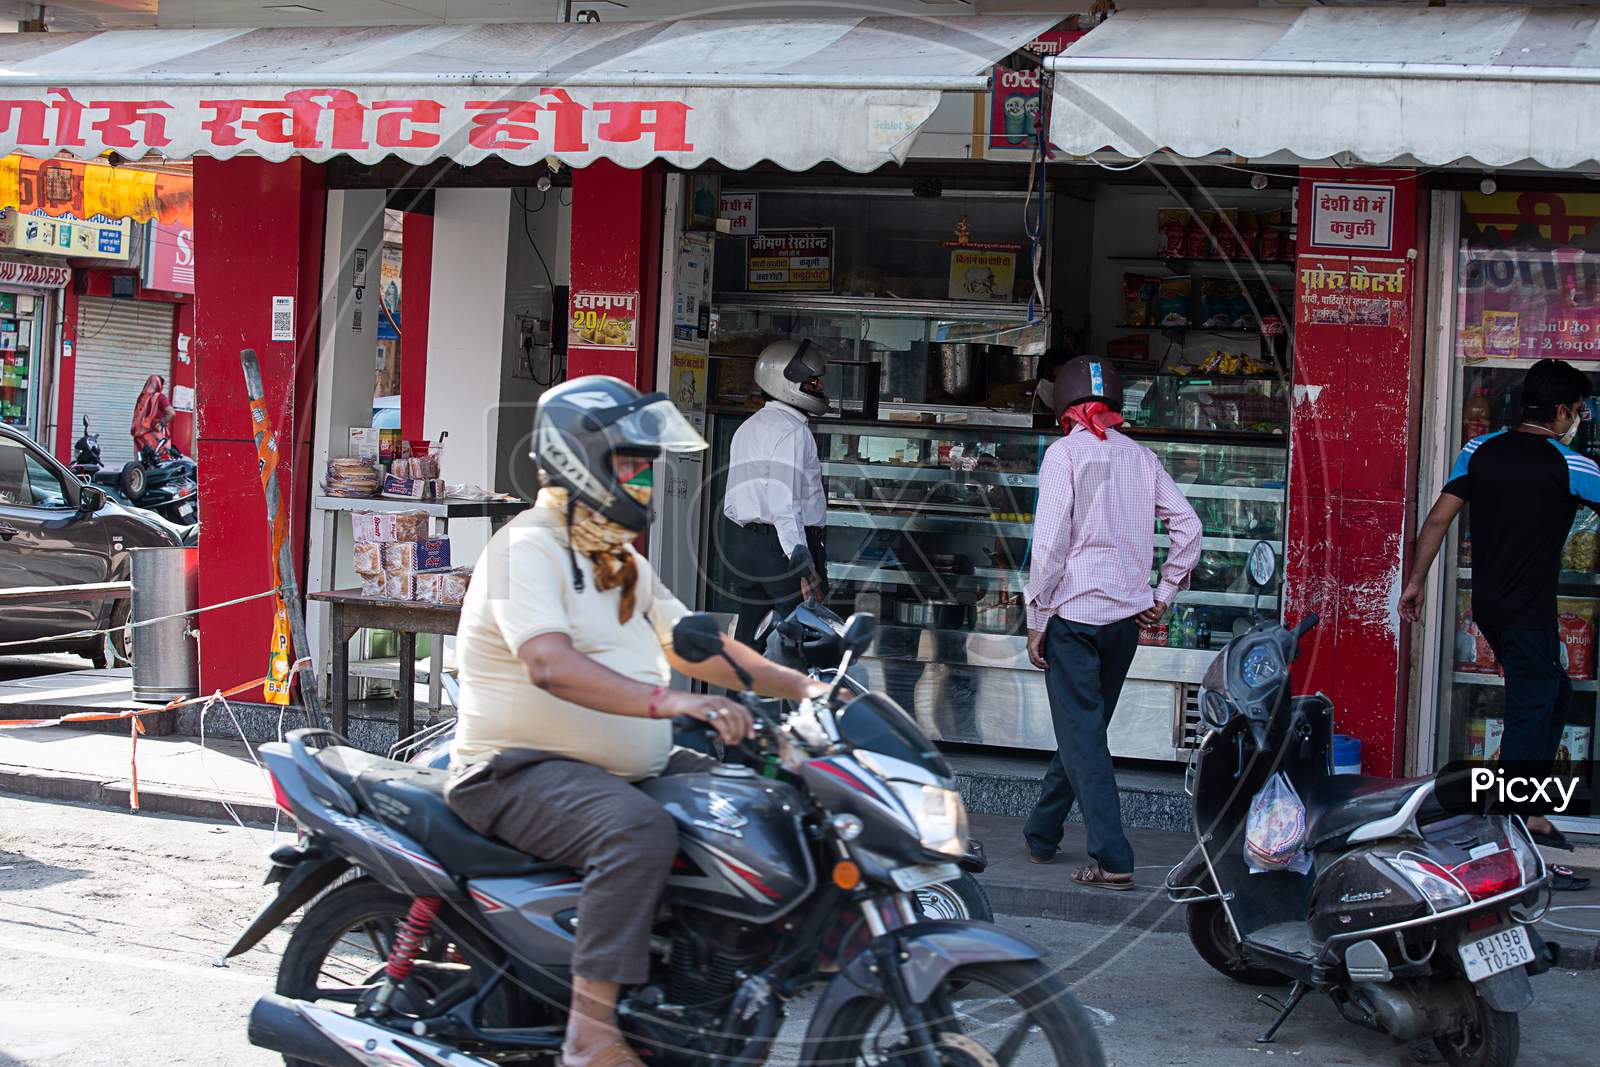 Jodhpur, Rajasthan, India - May 20 2020: People Coming Out, Shopes Reopen After Lock Down Restrictions Due To Covid-19 Pandemic, Back To The Normal Life With Few Safety Measure.